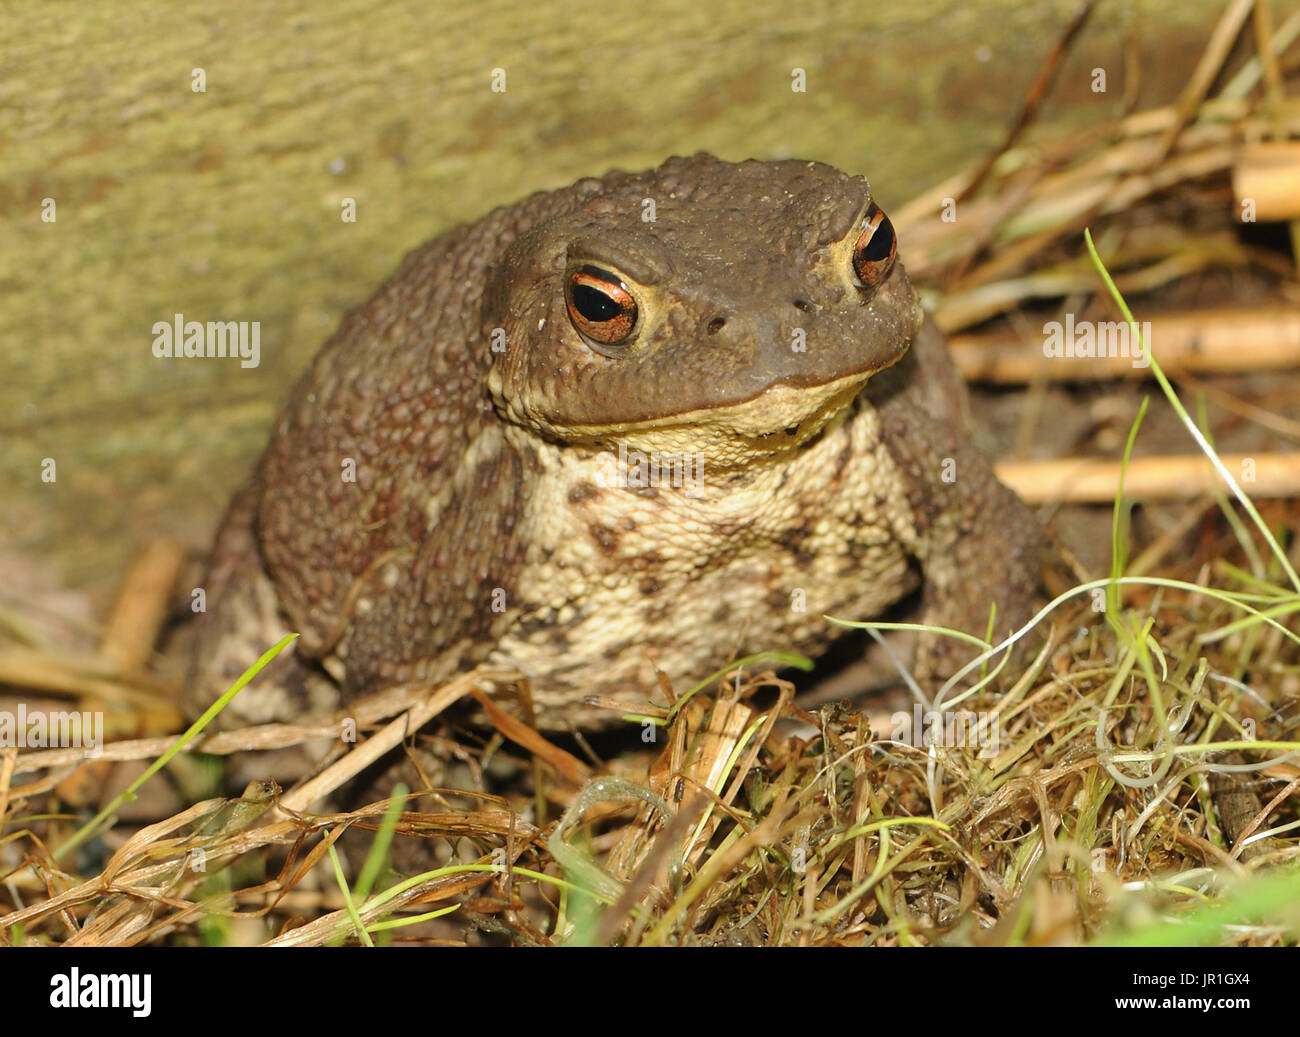 A Common Toad (Bufo bufo) disturbed in its garden hiding place. Bedgebury Forest, Kent, UK. Stock Photo